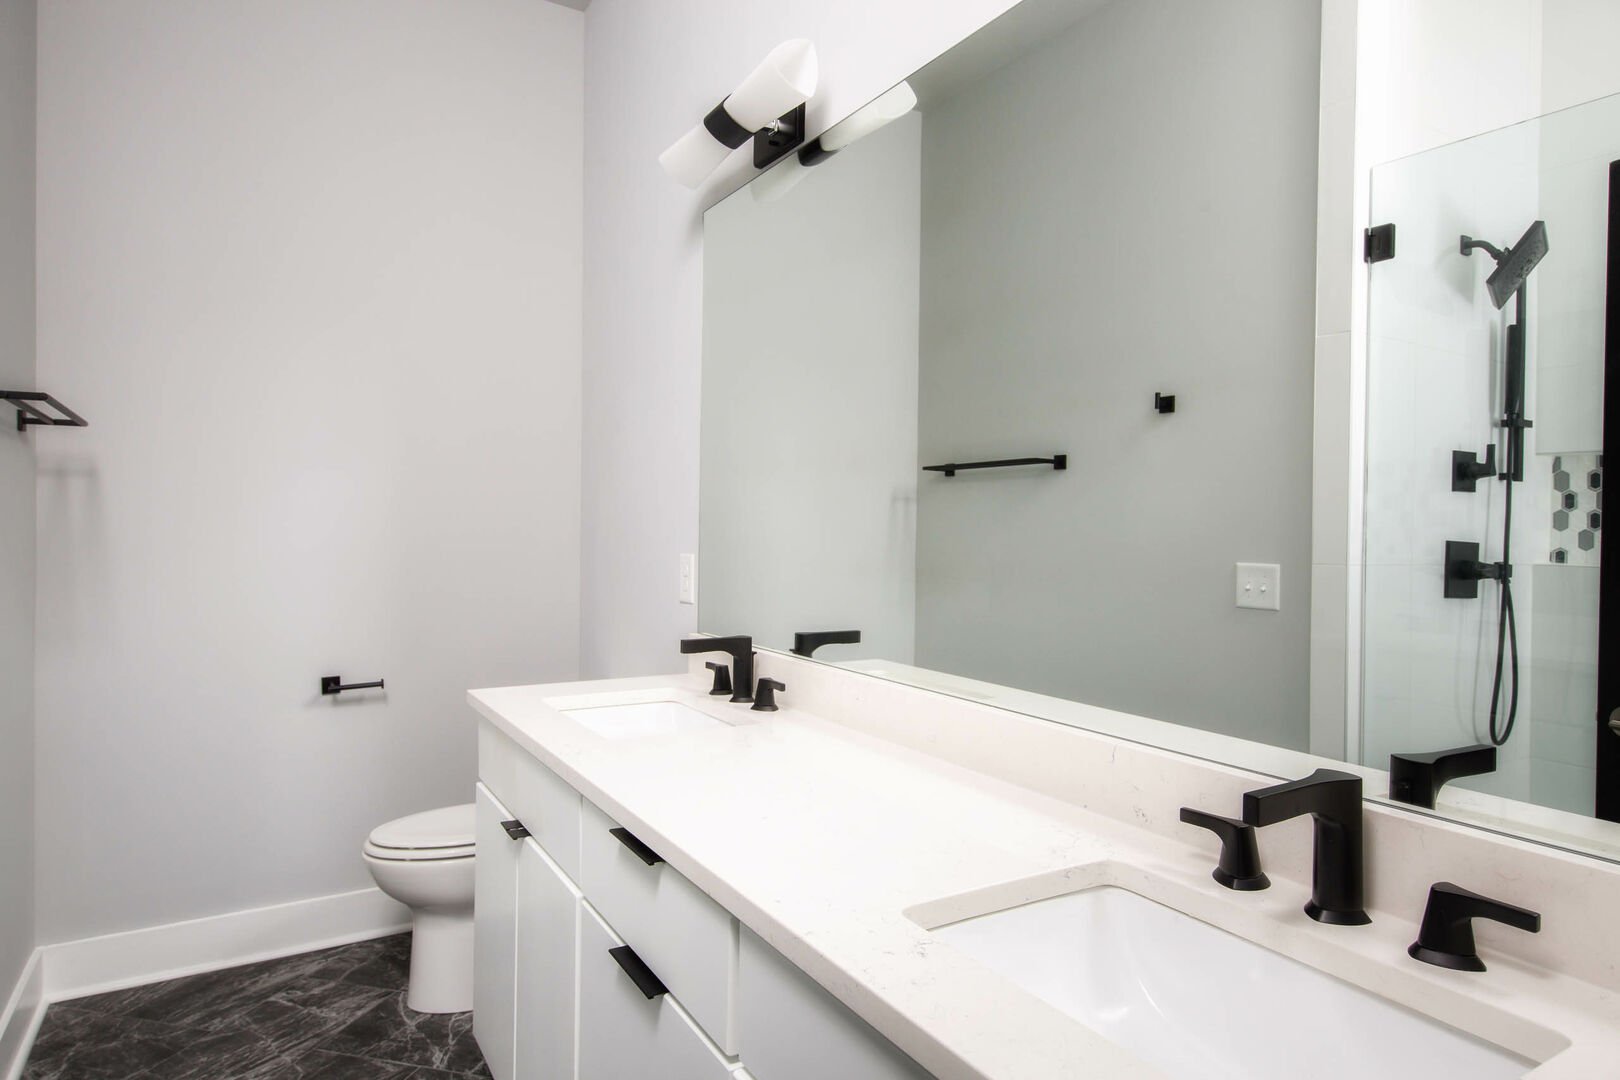 (1st Unit): Master bathroom with double sink vanity and large walk-in shower